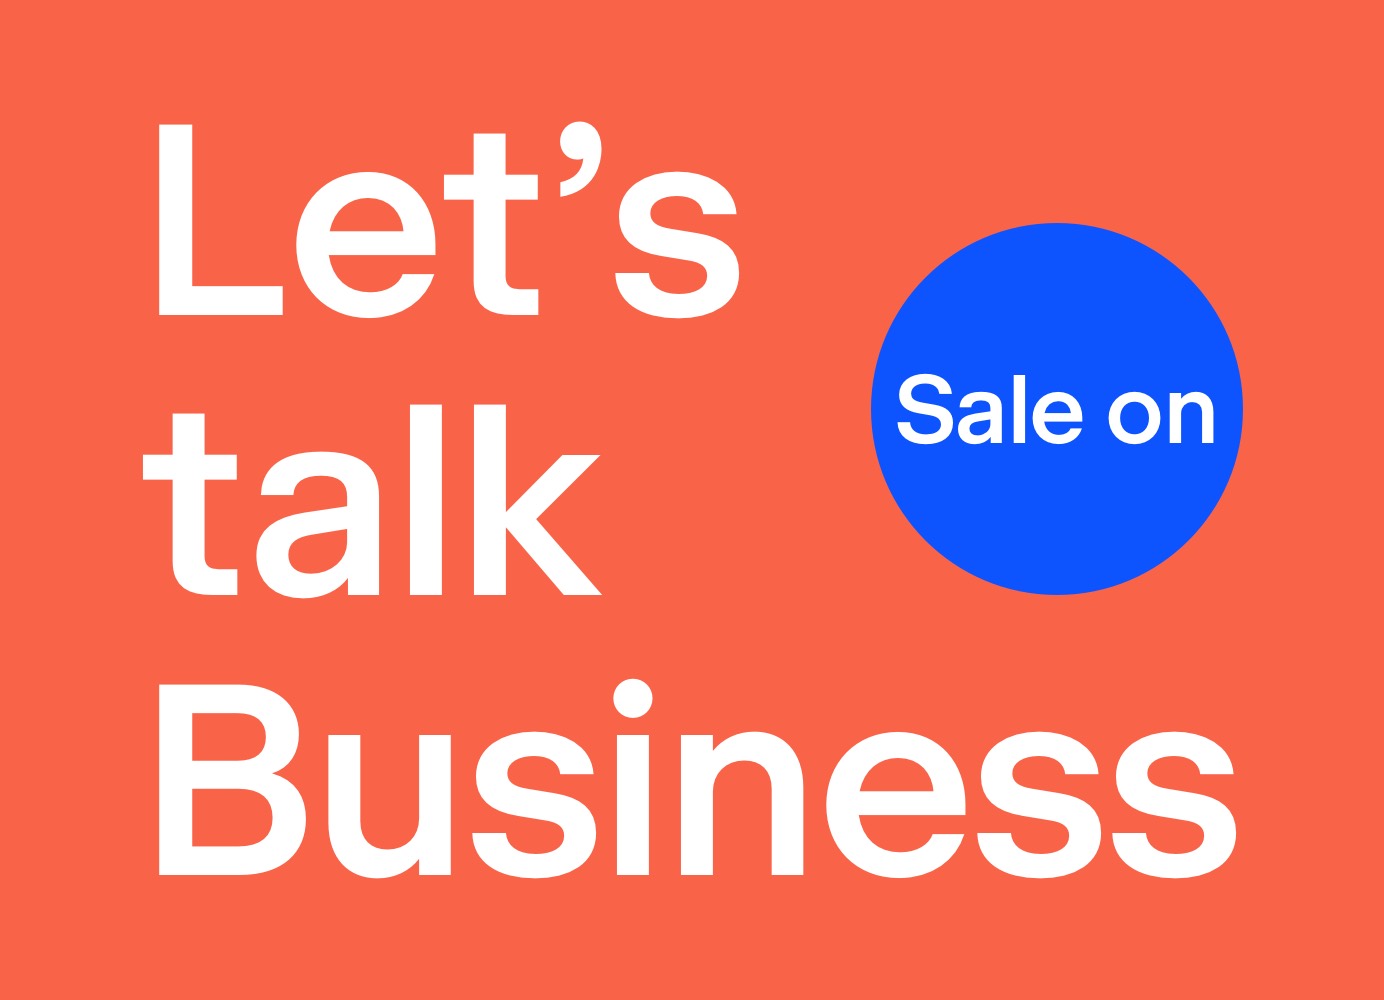 In a vibrant promotional graphic, the bold white text “Let’s talk Business” stands out against a solid orange background, accompanied by a blue circle containing the words “Sale on.”